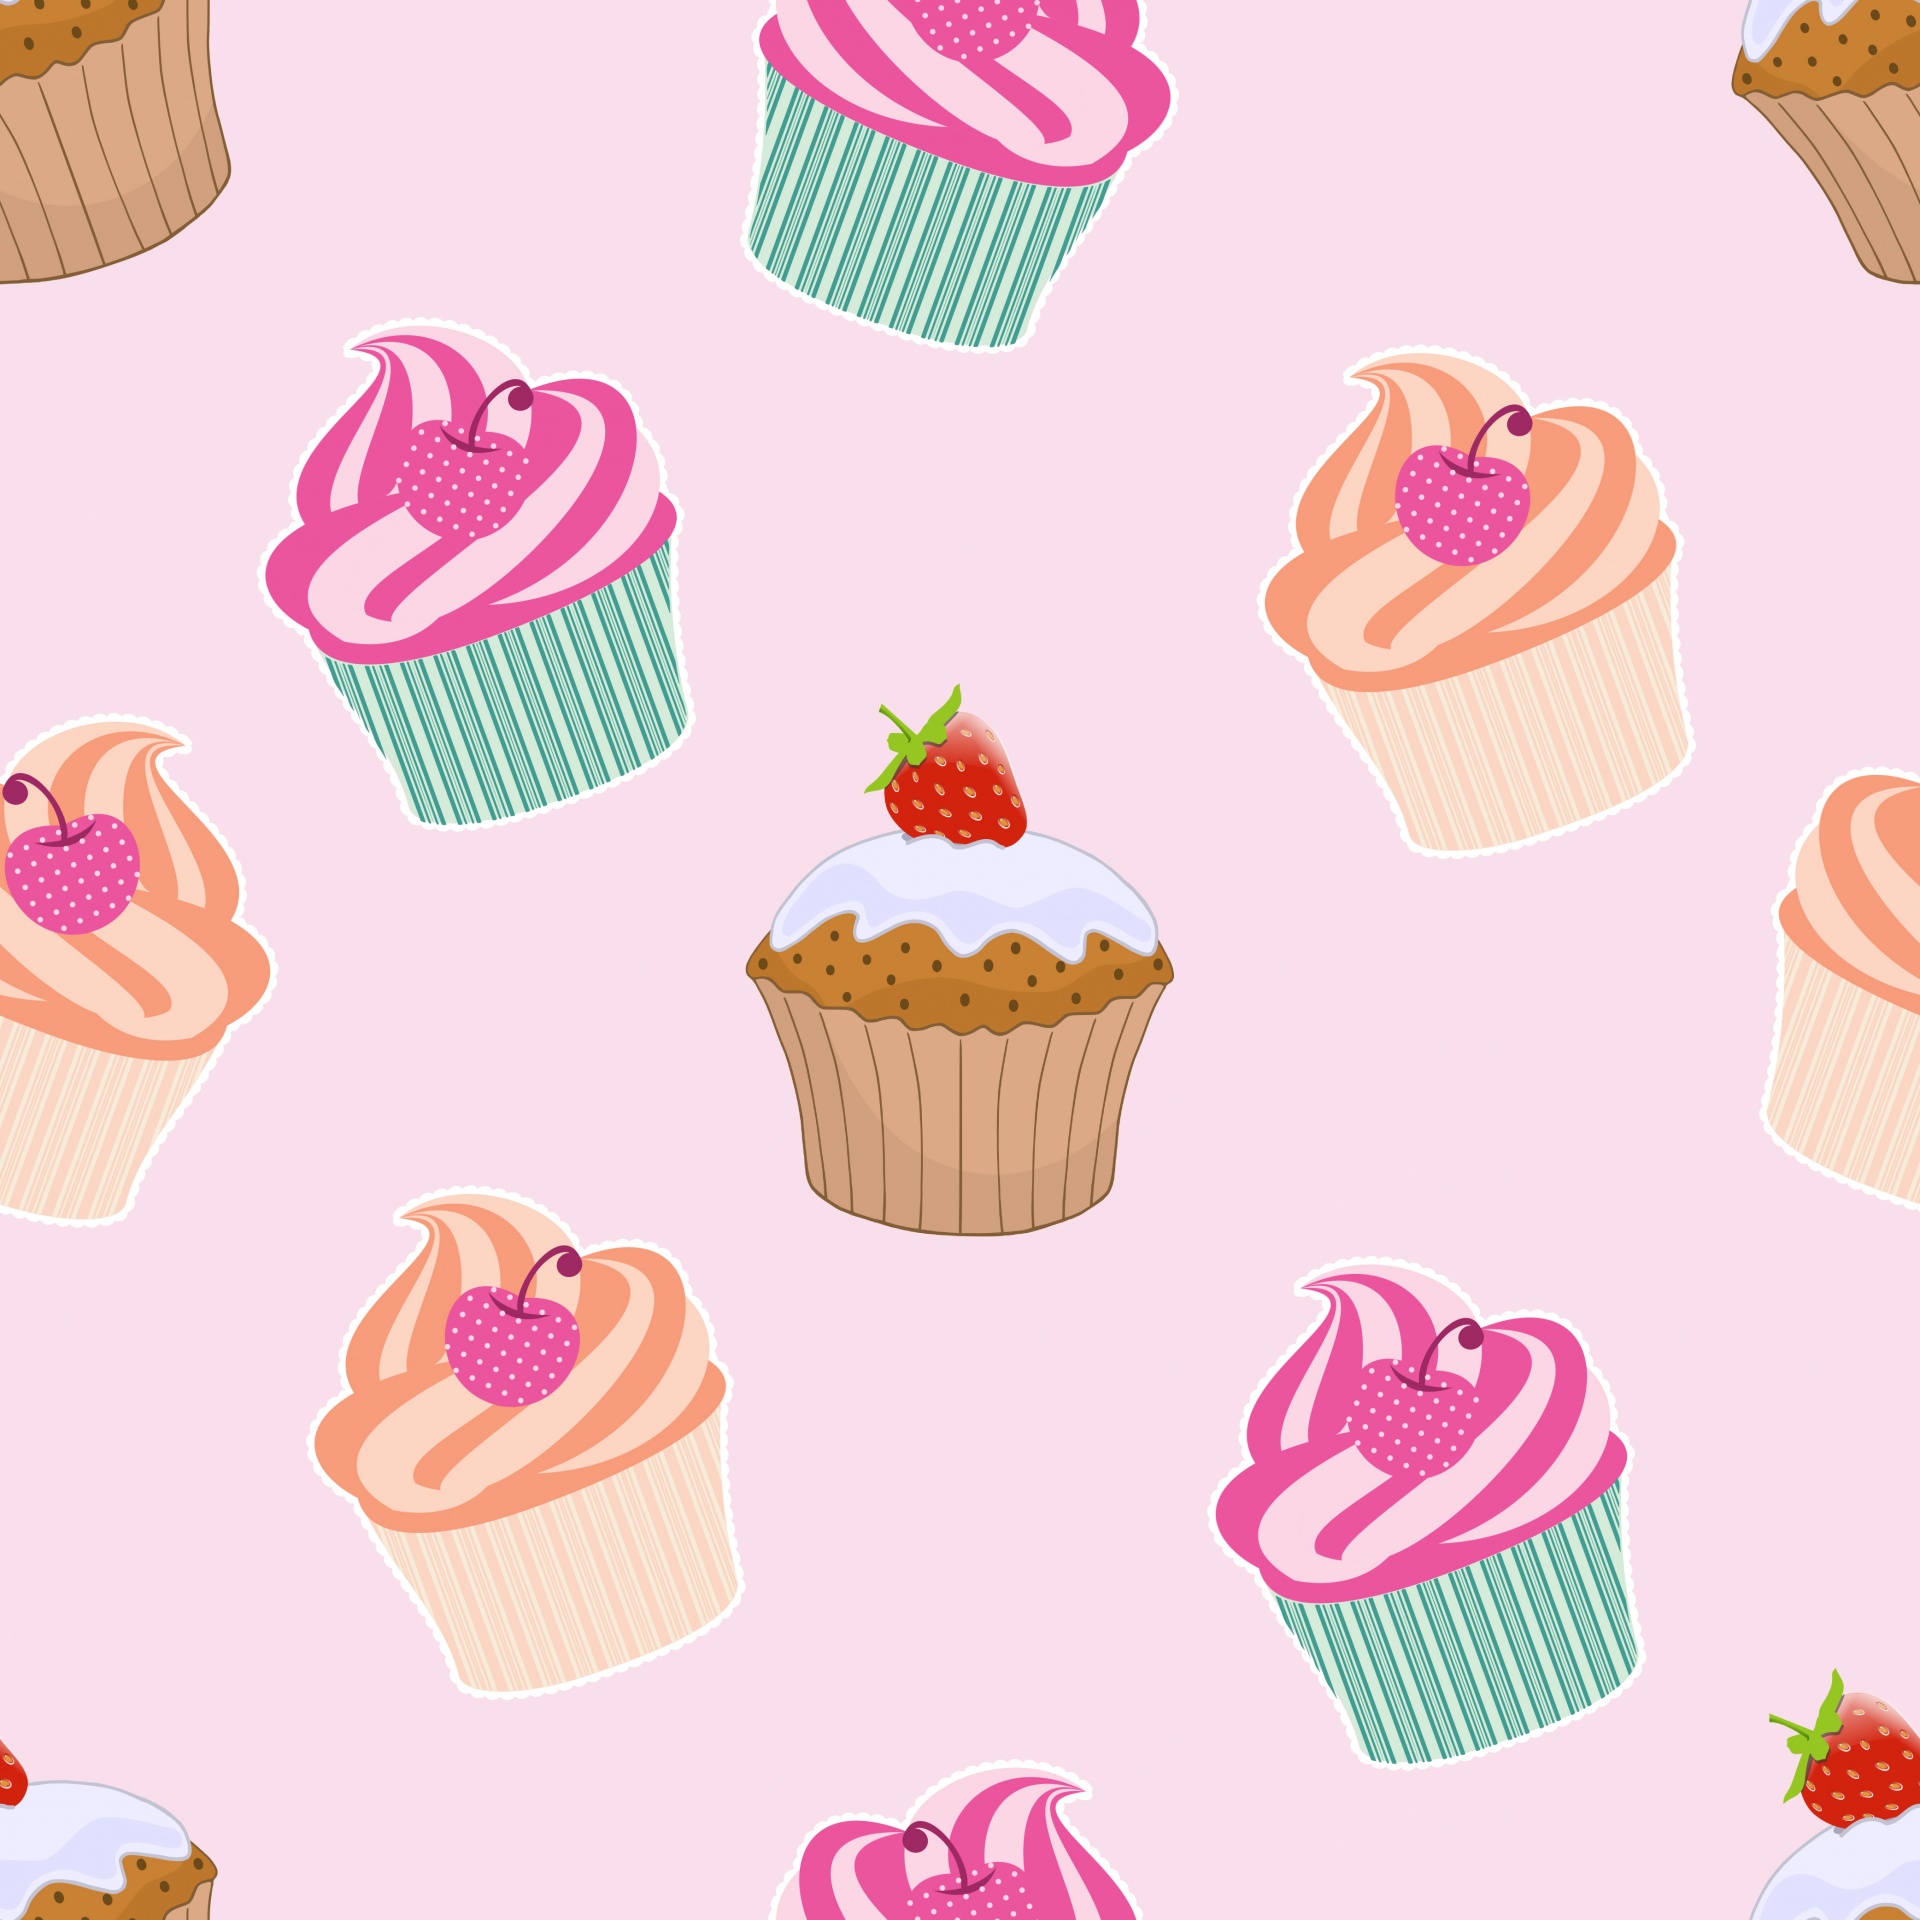  Cupcakes  And Muffins Wallpaper  Free Stock Photo Public 